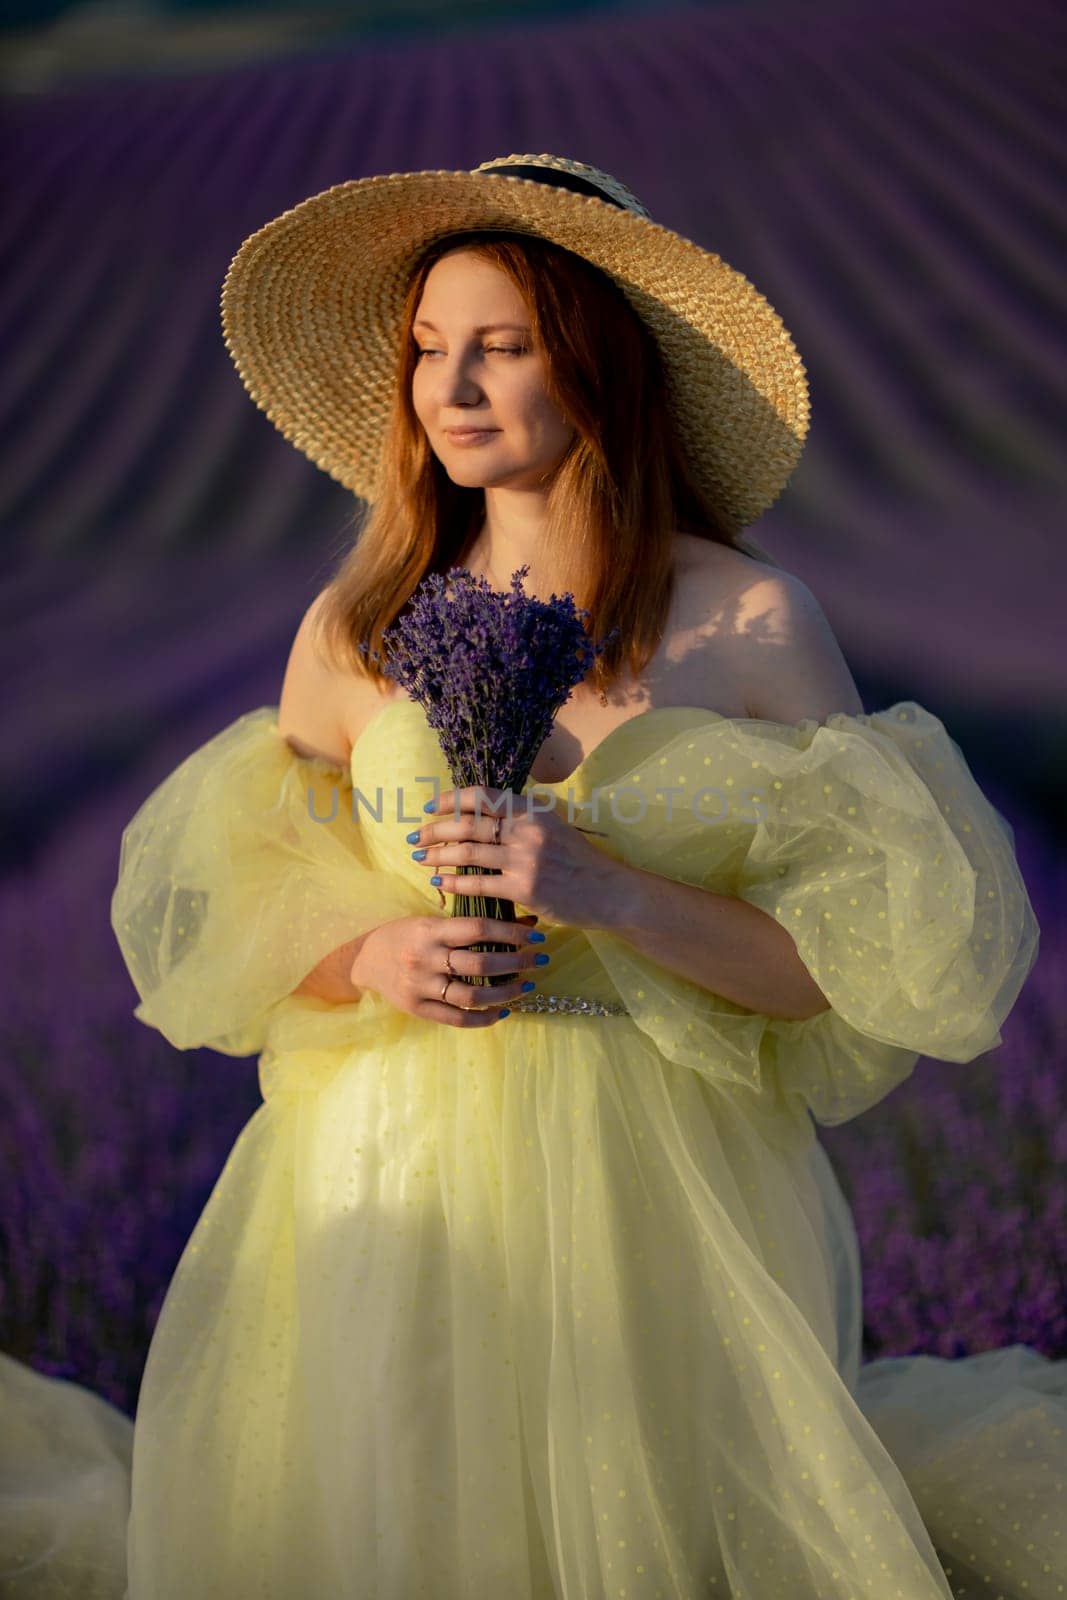 Lavender sunset girl. A laughing girl in a blue dress with flowing hair in a hat walks through a lilac field, holds a bouquet of lavender in her hands. Aromatherapy concept, lavender oil, photo session in lavender.